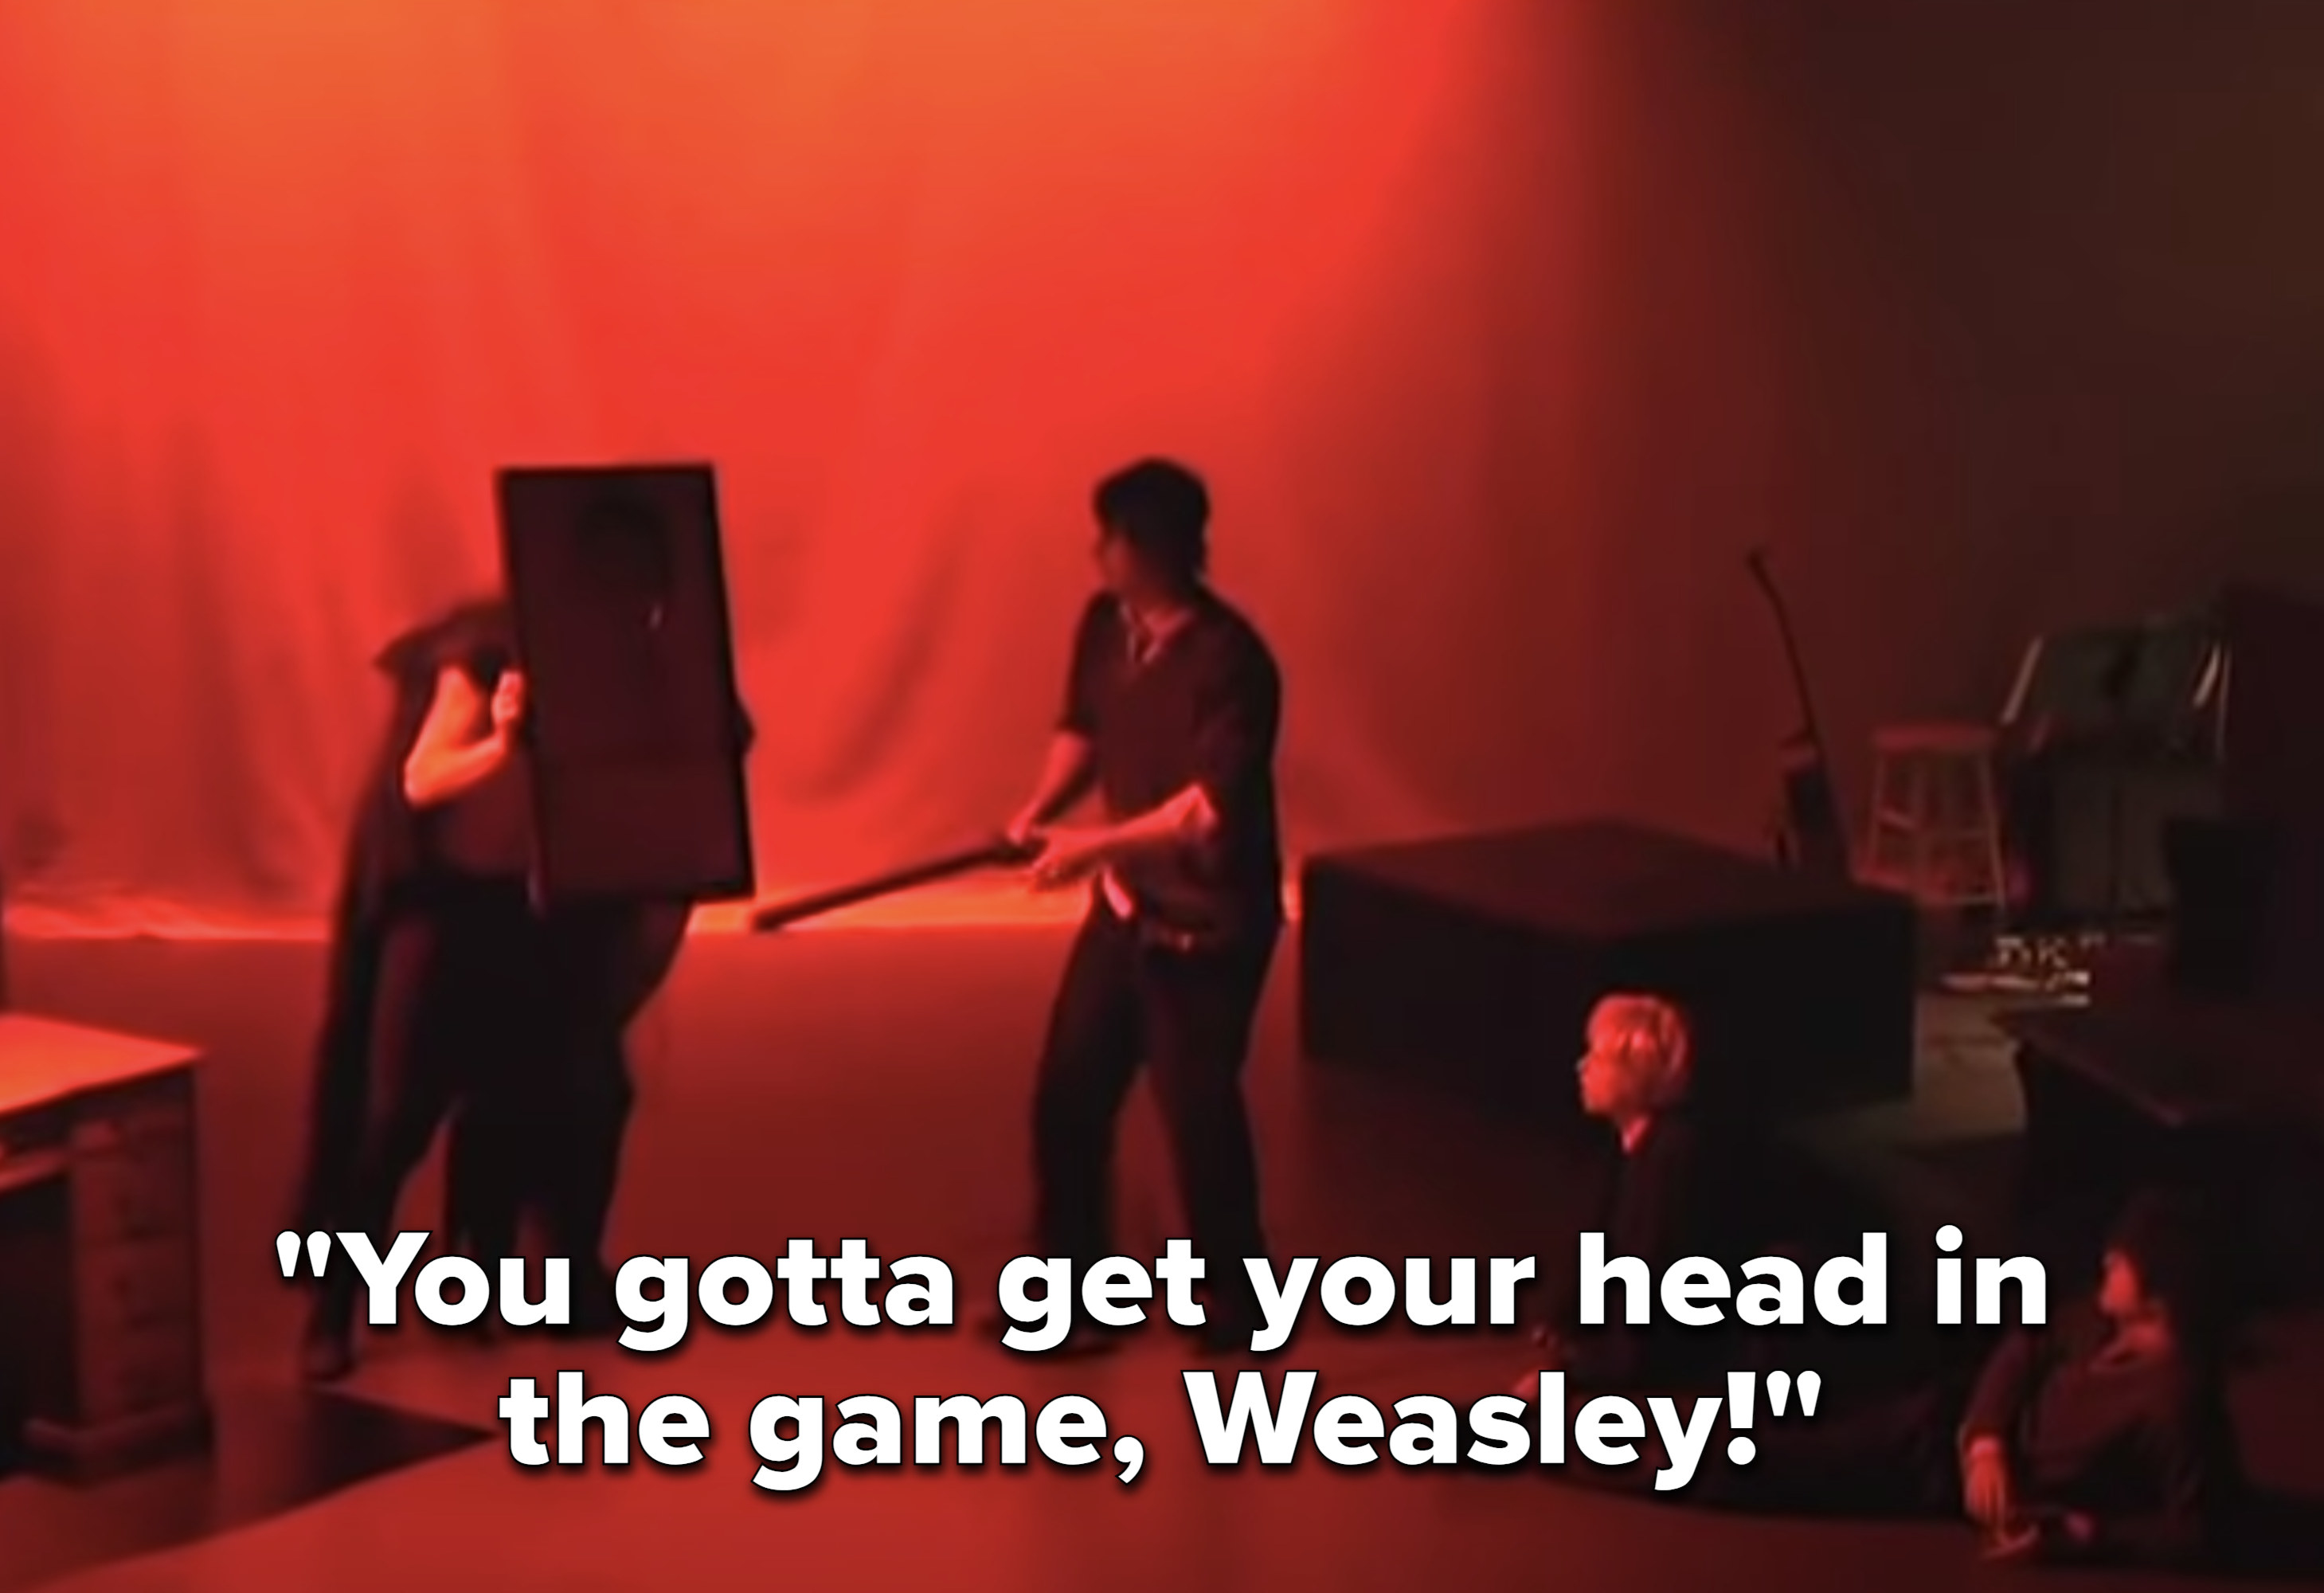 horcrux: &quot;You gotta get your head in the game, Weasley!&quot;